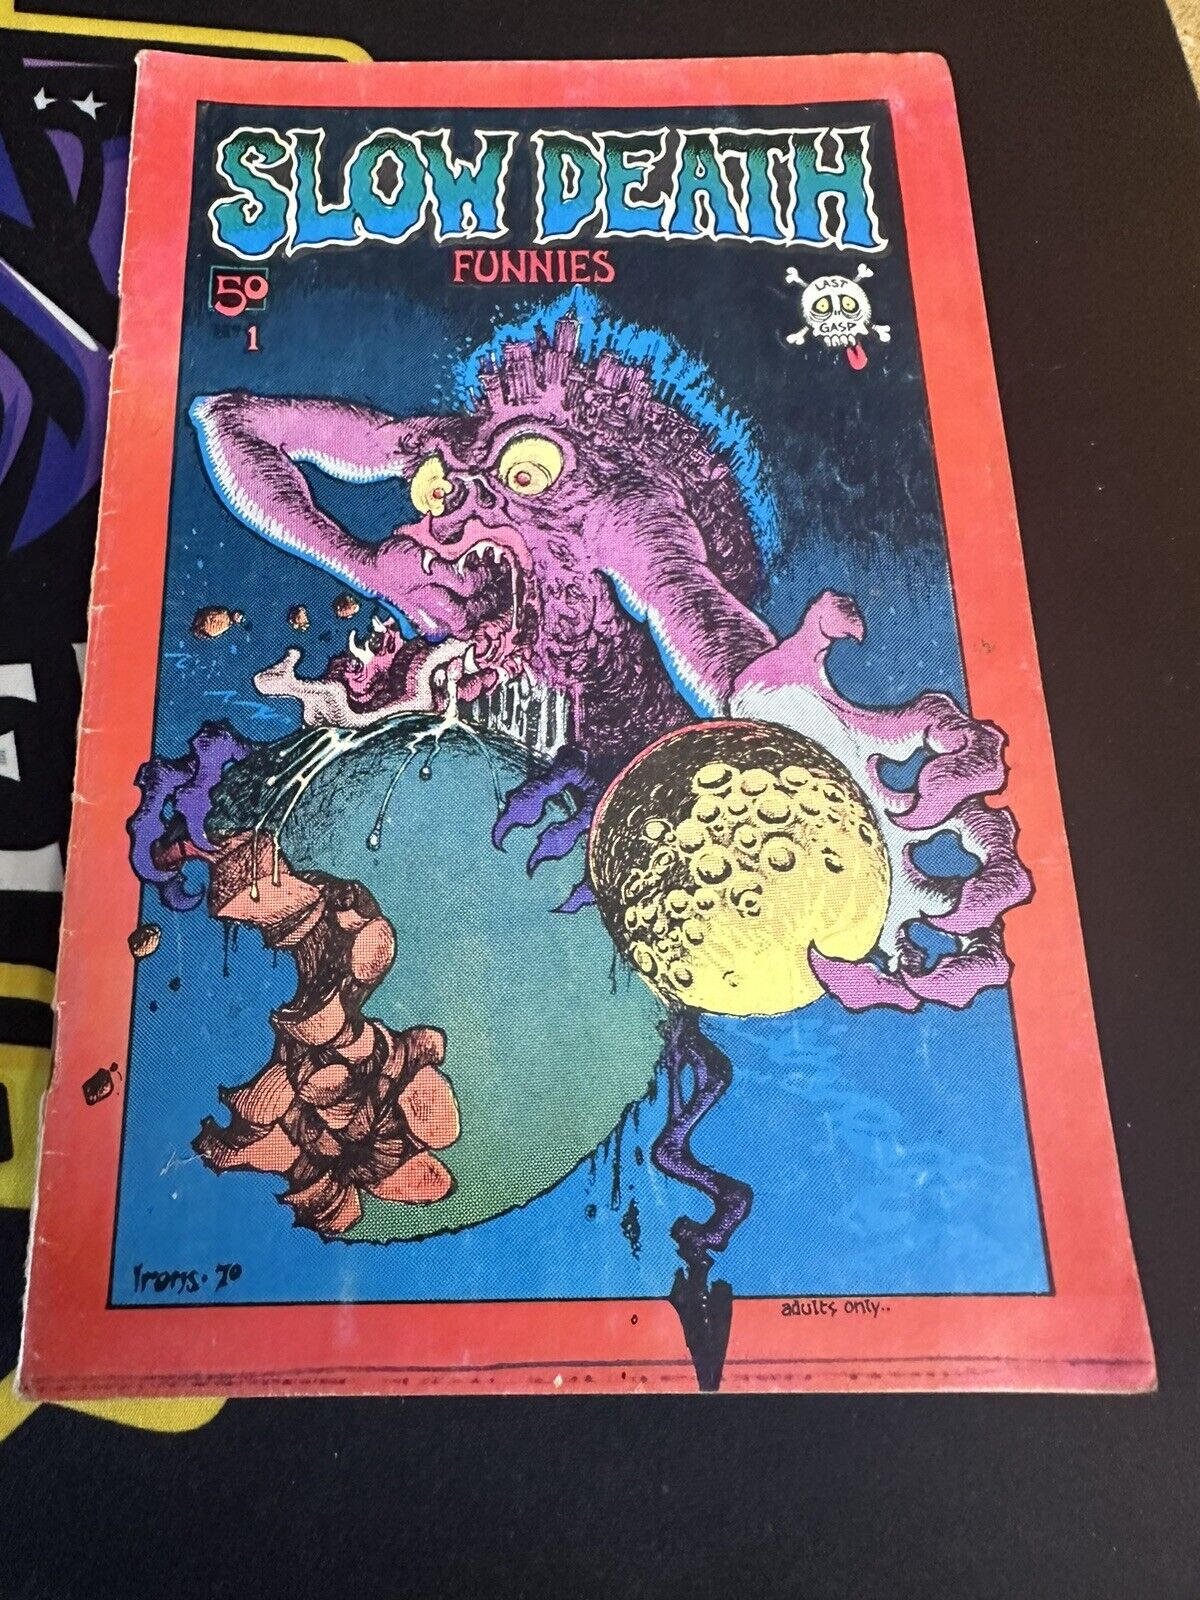 SLOW DEATH FUNNIES #1 CRUMB AND OTHERS FIRST PRINTING 1970